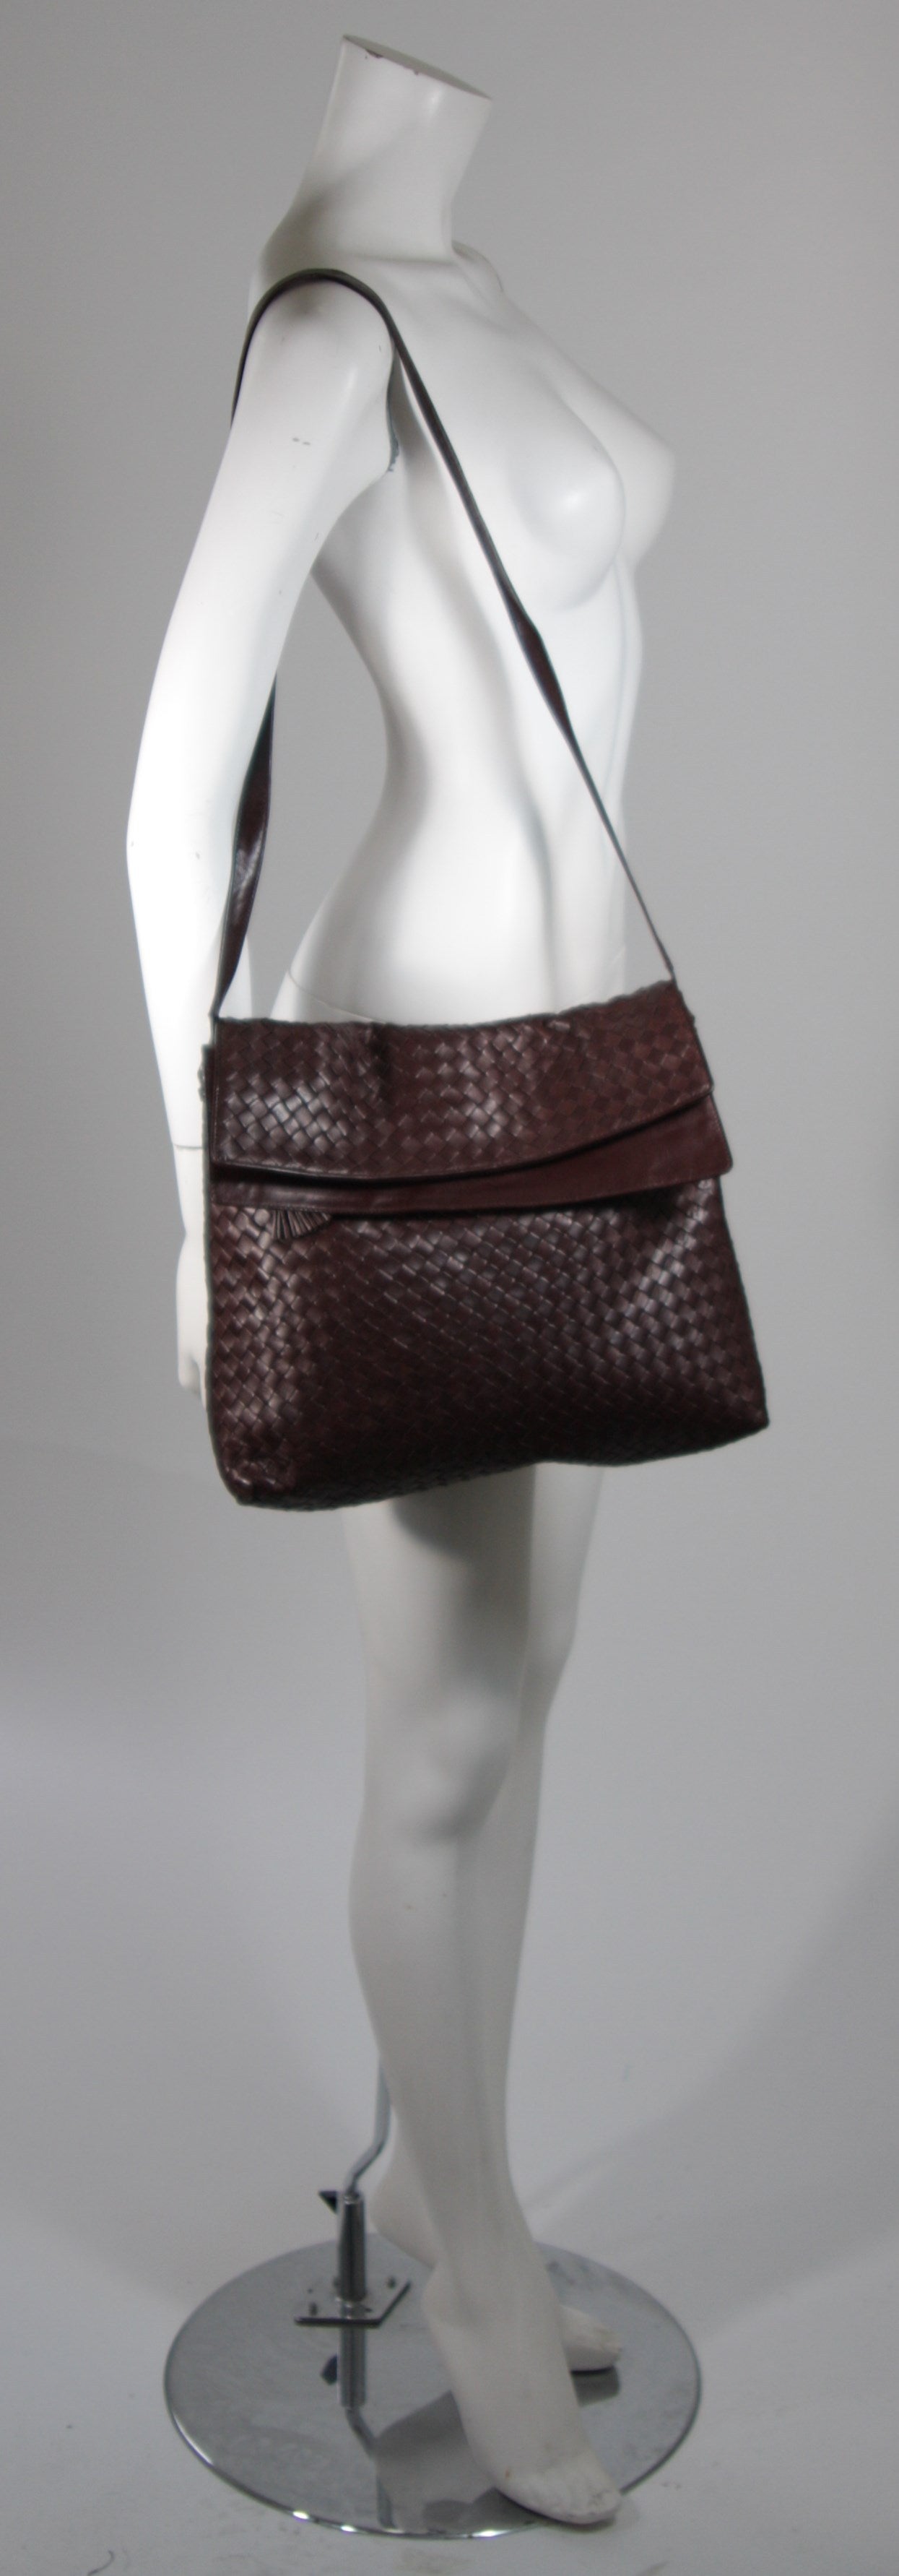 This vintage Bottega Veneta is available for viewing at our Beverly Hills Boutique. We offer a large selection of evening gowns and luxury garments.

This handbag is composed of a supple rich brown woven leather. The purse features one exterior